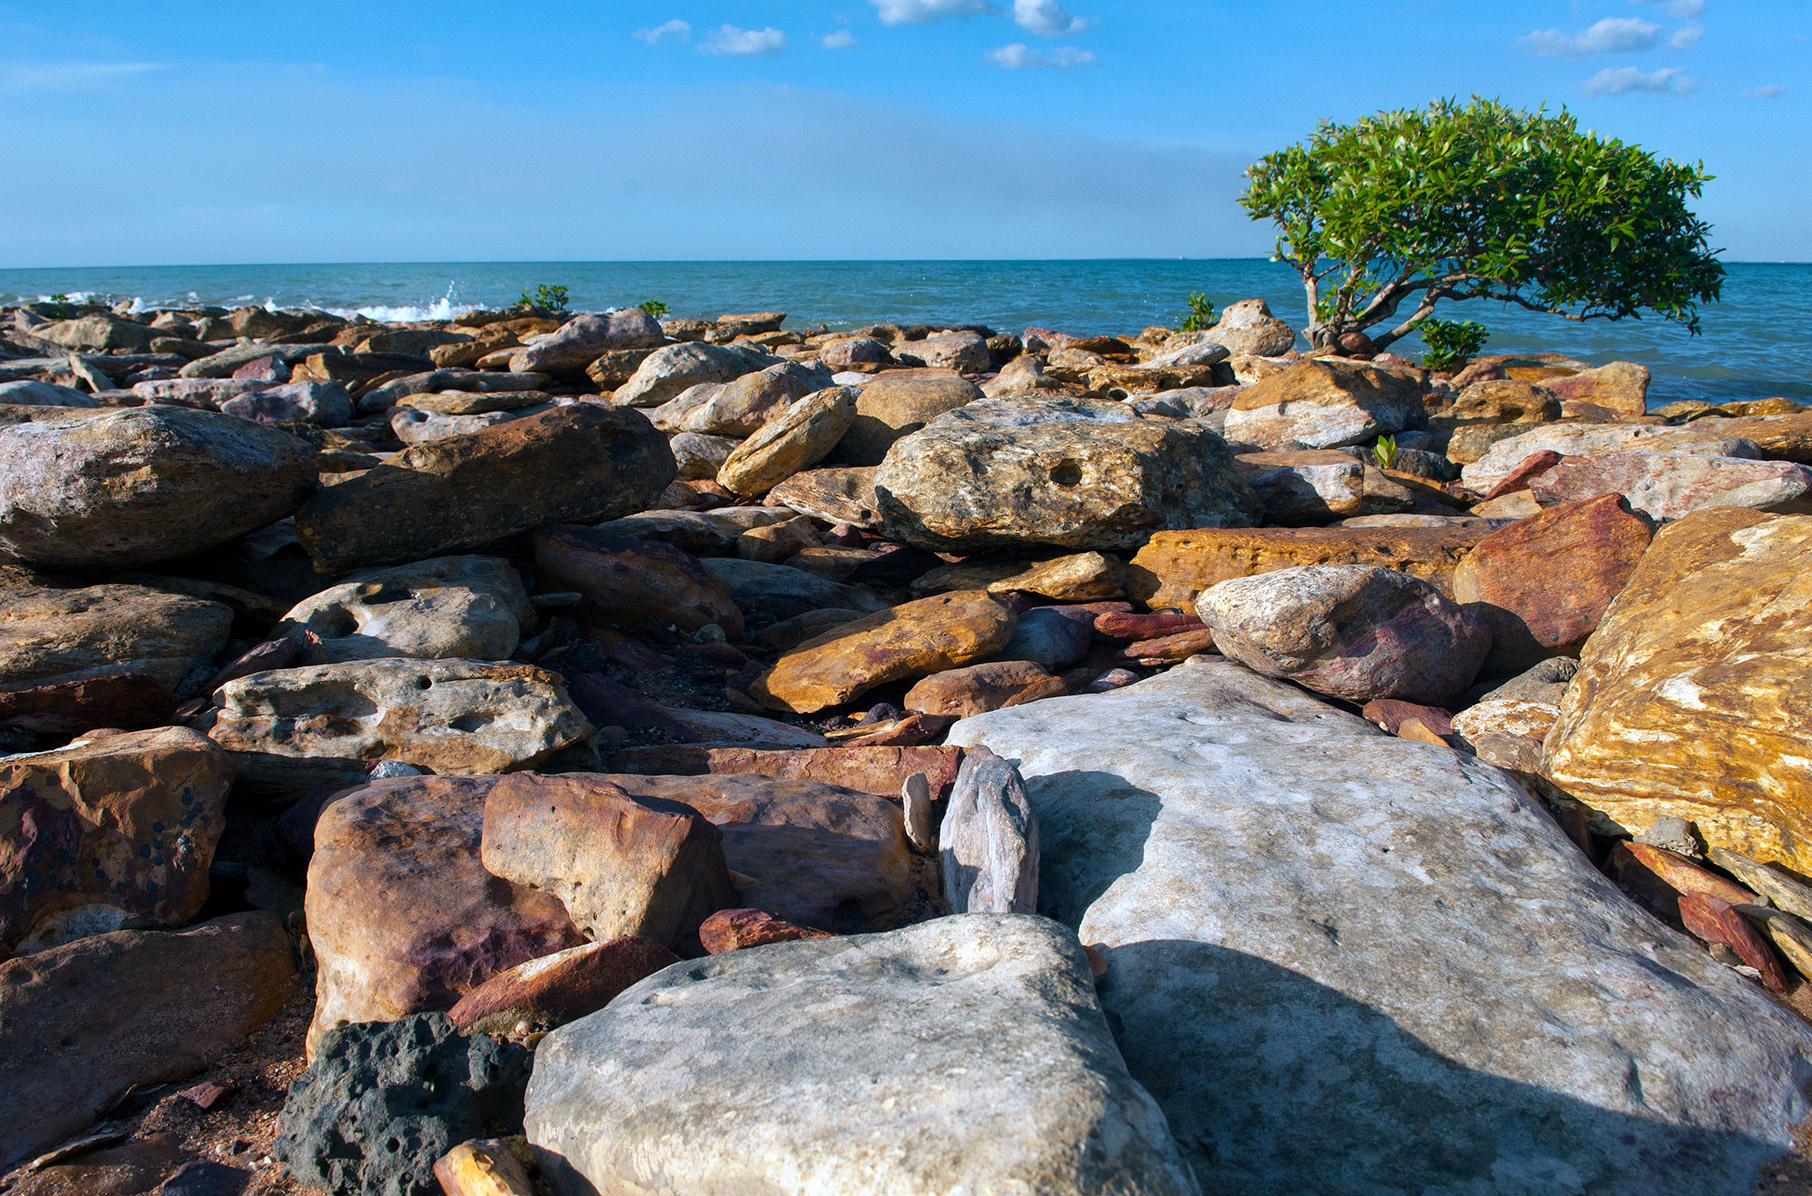 The inter-tidal rocks around Darwin don't support as much growth or invertebrate life as those down south because of the huge tidal range. However, they can be very slippery when damp! Take care.